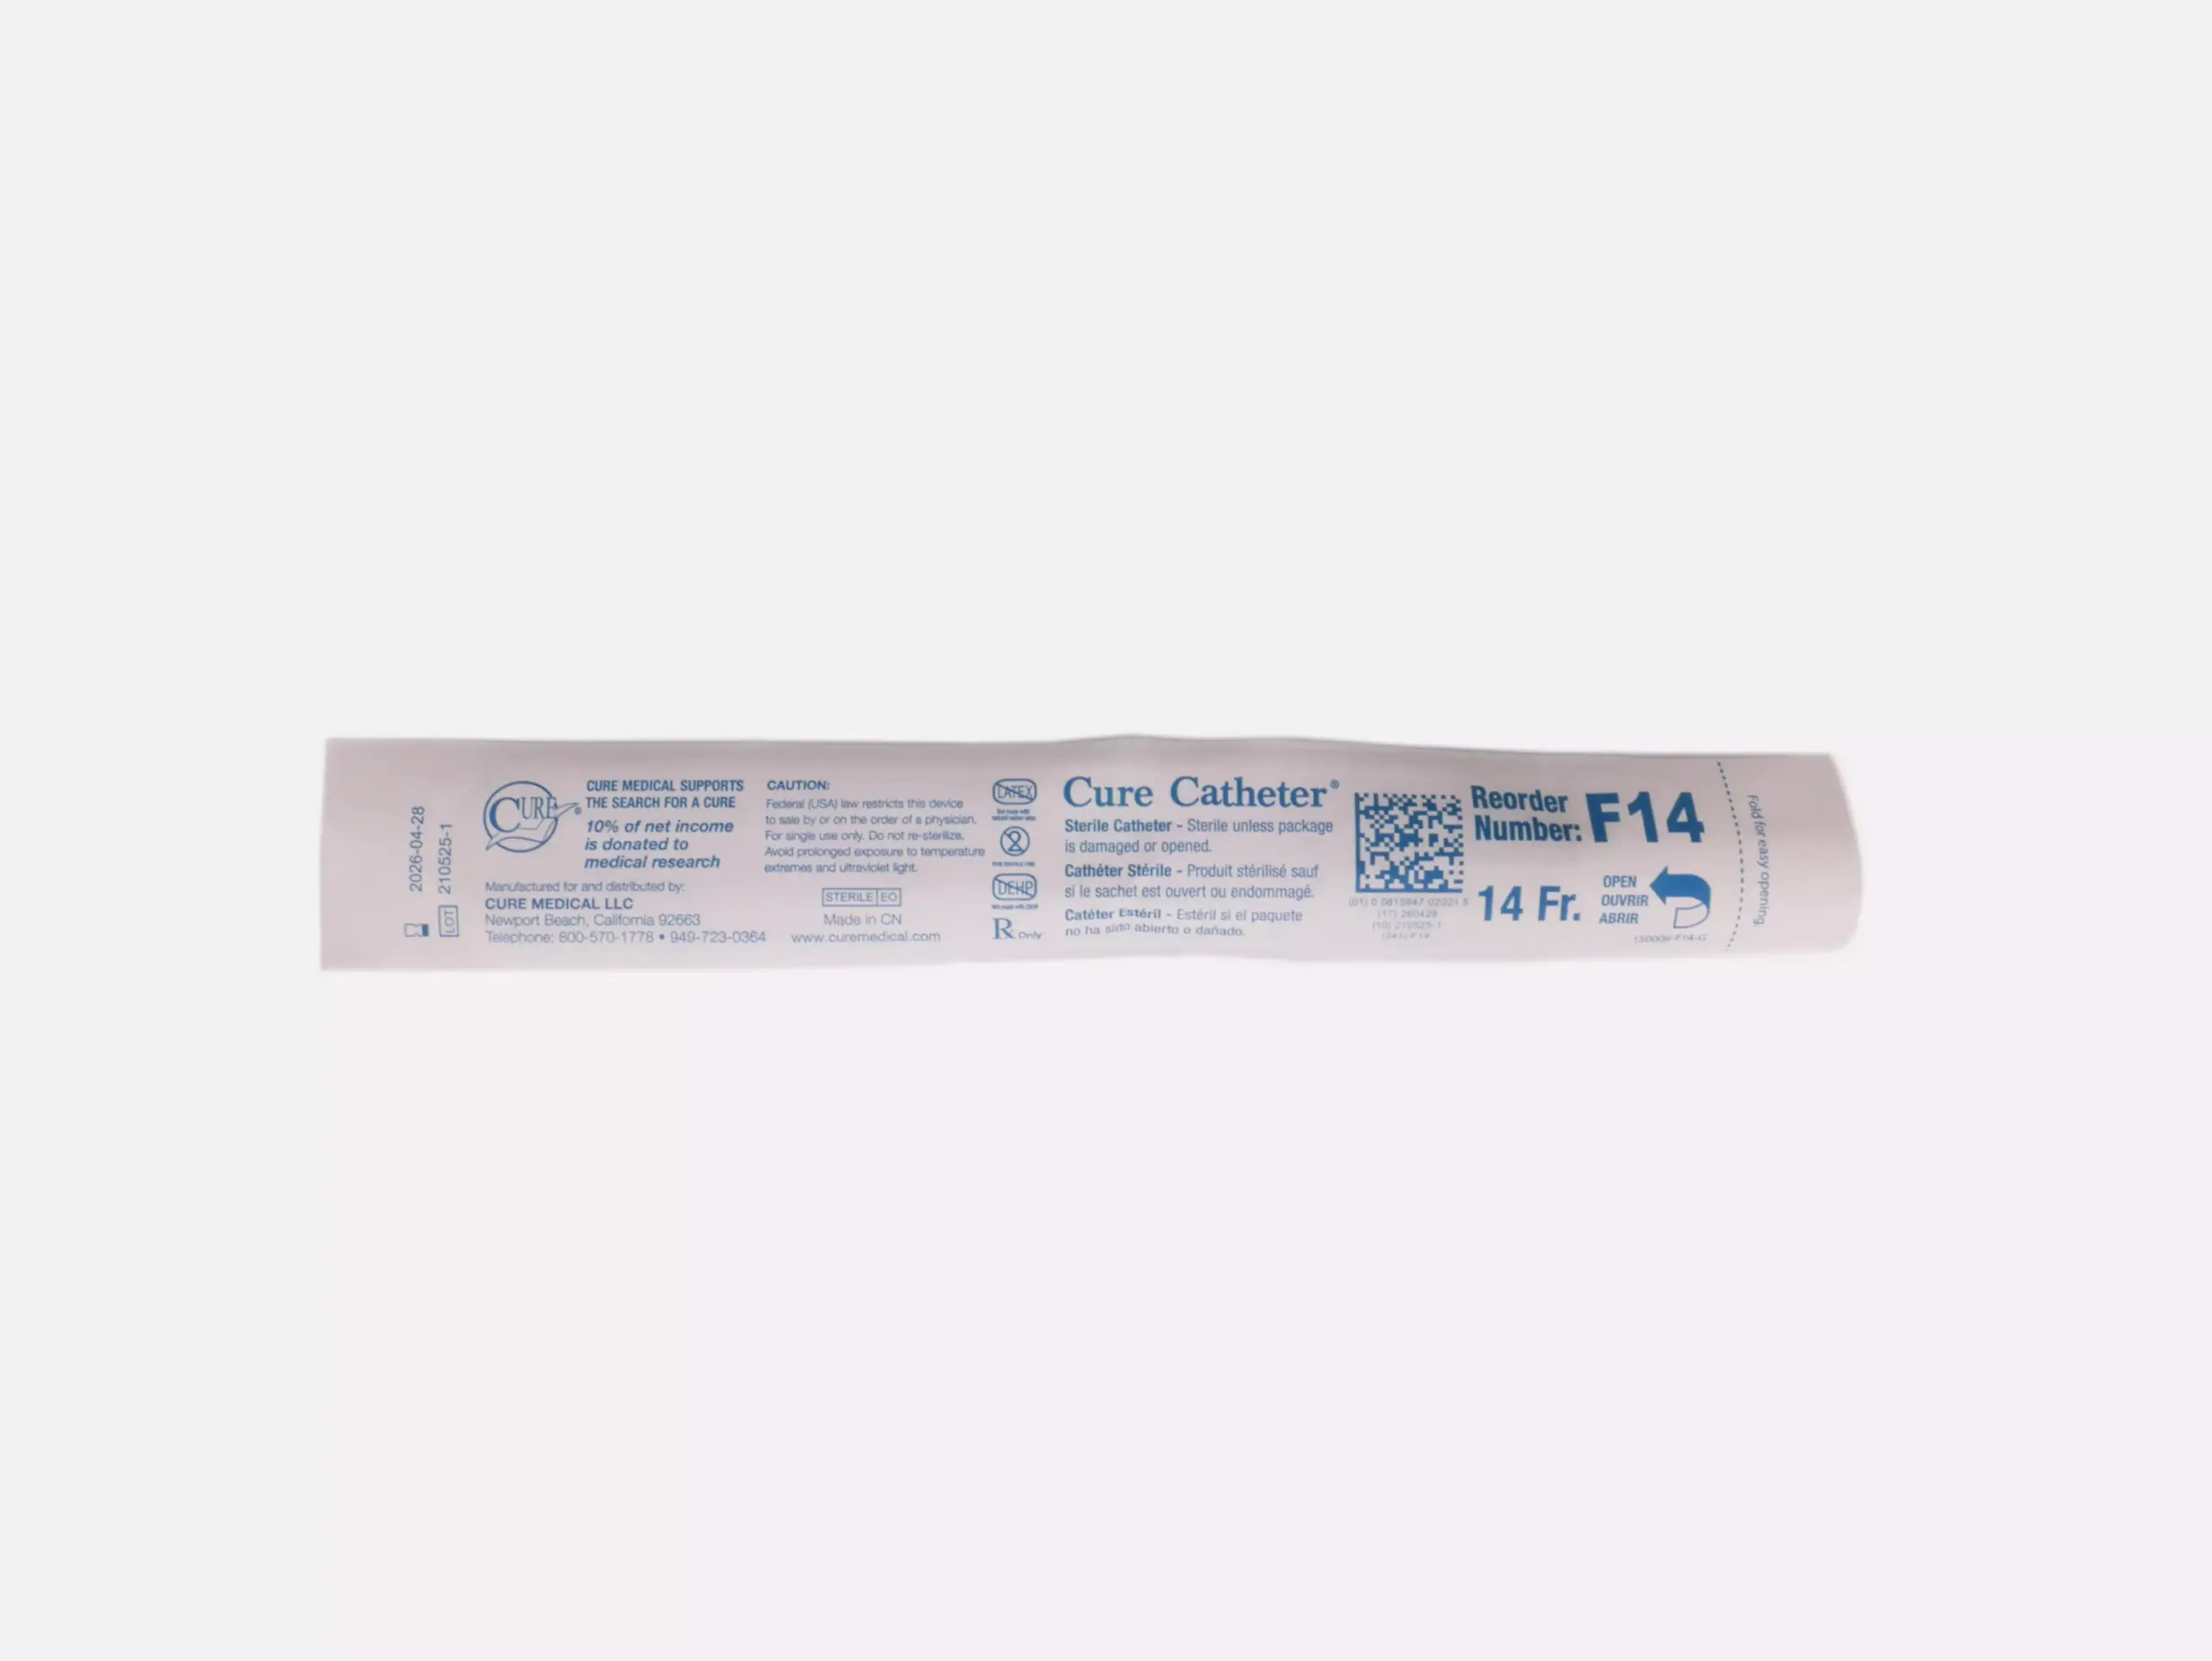 Photograph of a RA Fischer Co. Cure brand catheter against a white background. The packaging reads "Cure Catheter. Sterile Catheter."